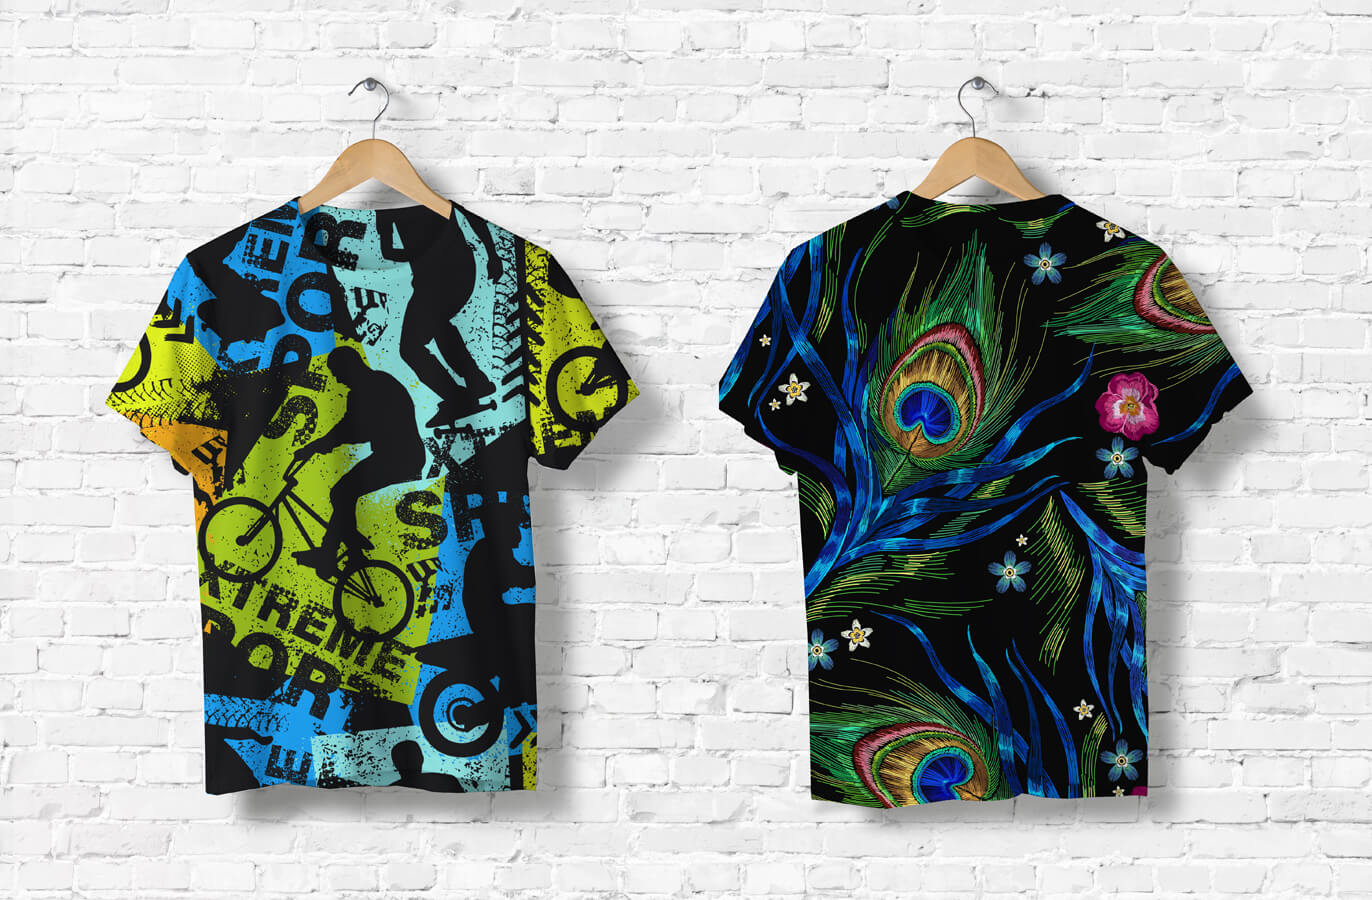 The Impact of Style in Printed T-Shirts